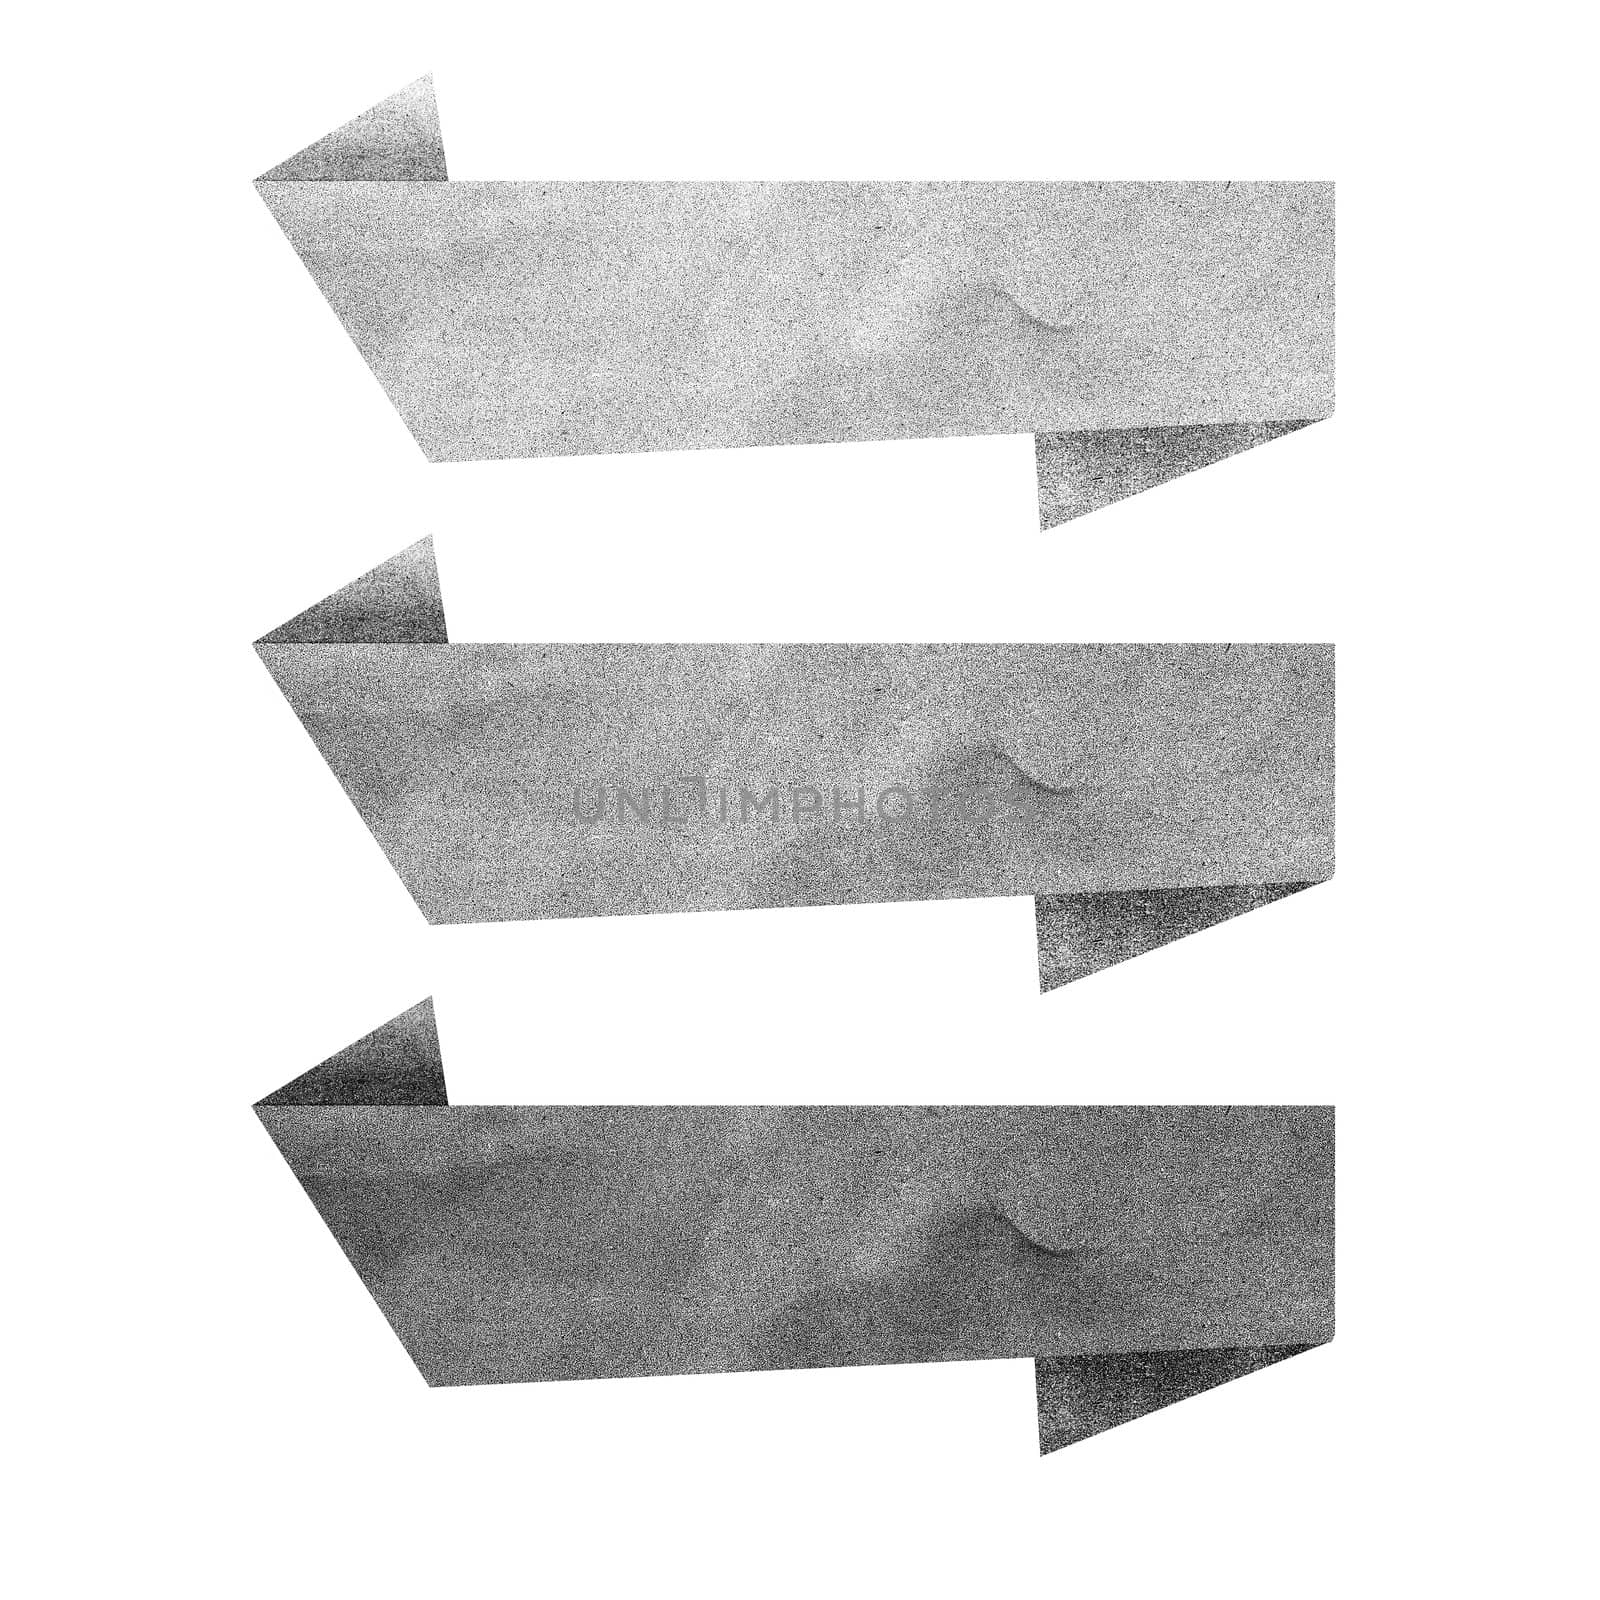 Paper texture ,Black Talk tag on white background